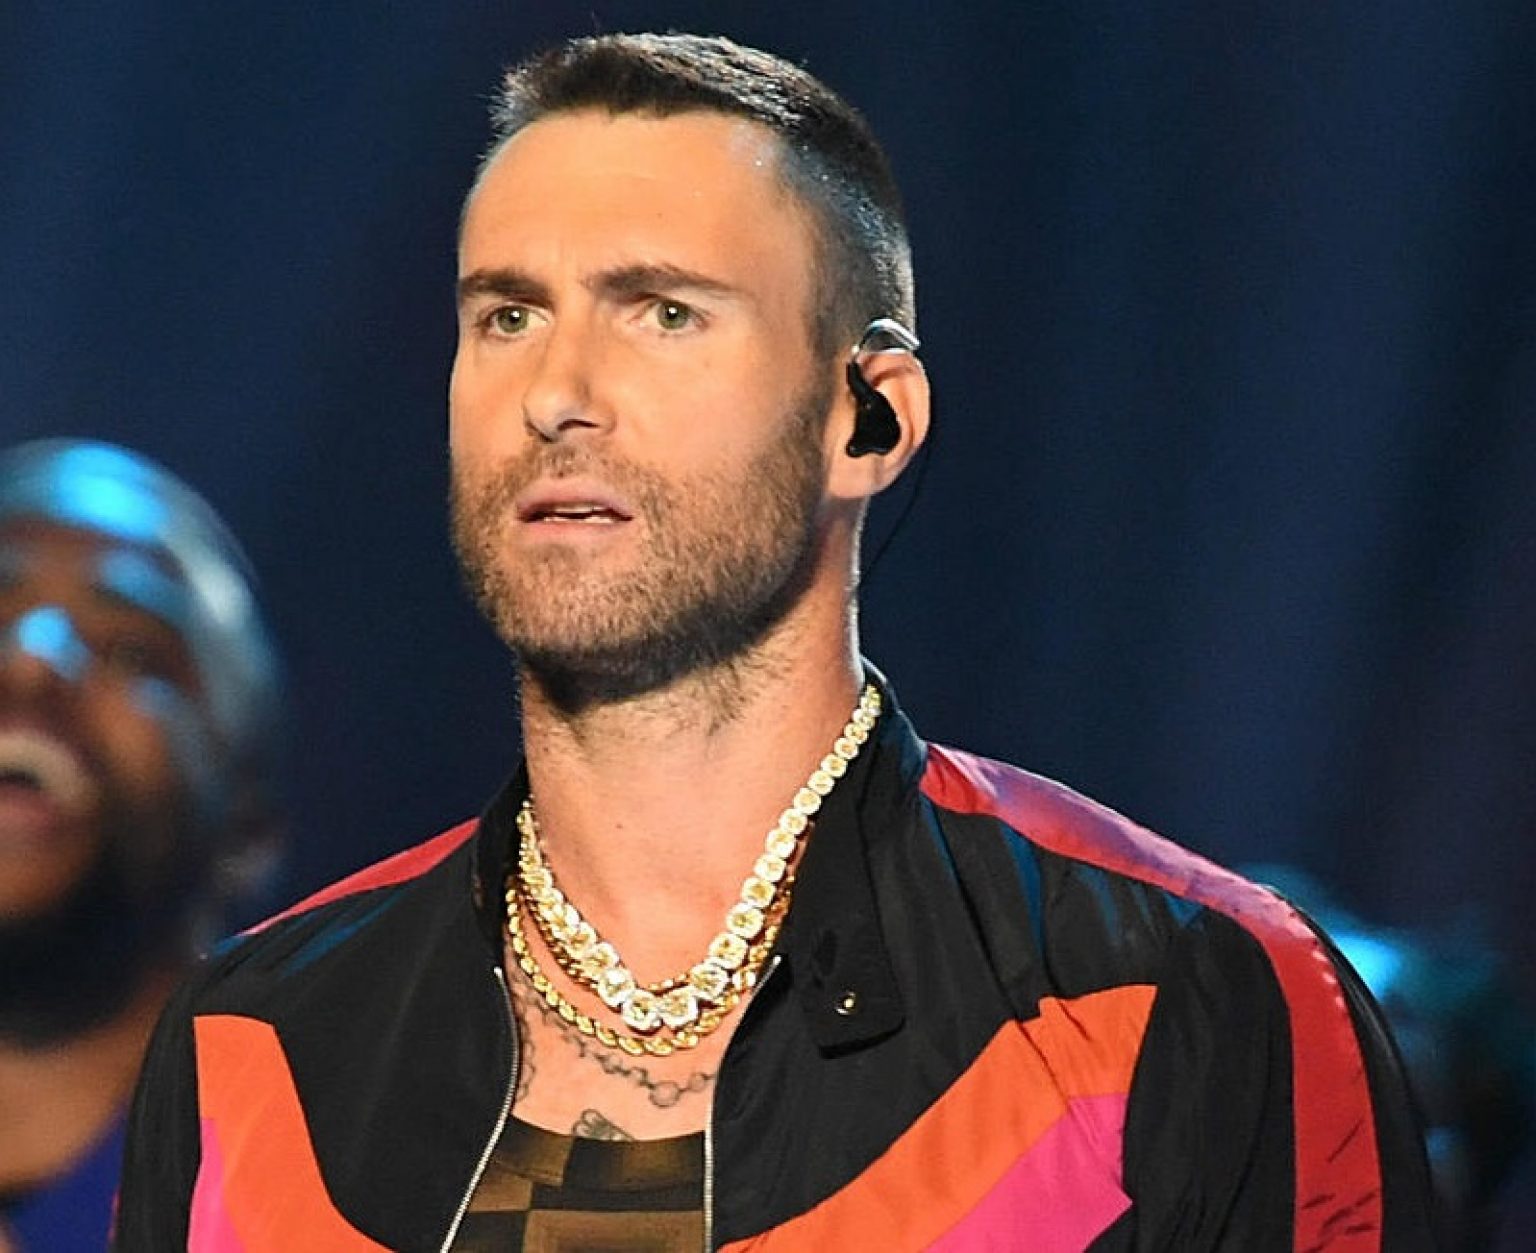 Adam Levine's Blue Hair Is the Latest in a Long Line of Bold Celebrity Hair Changes - wide 7